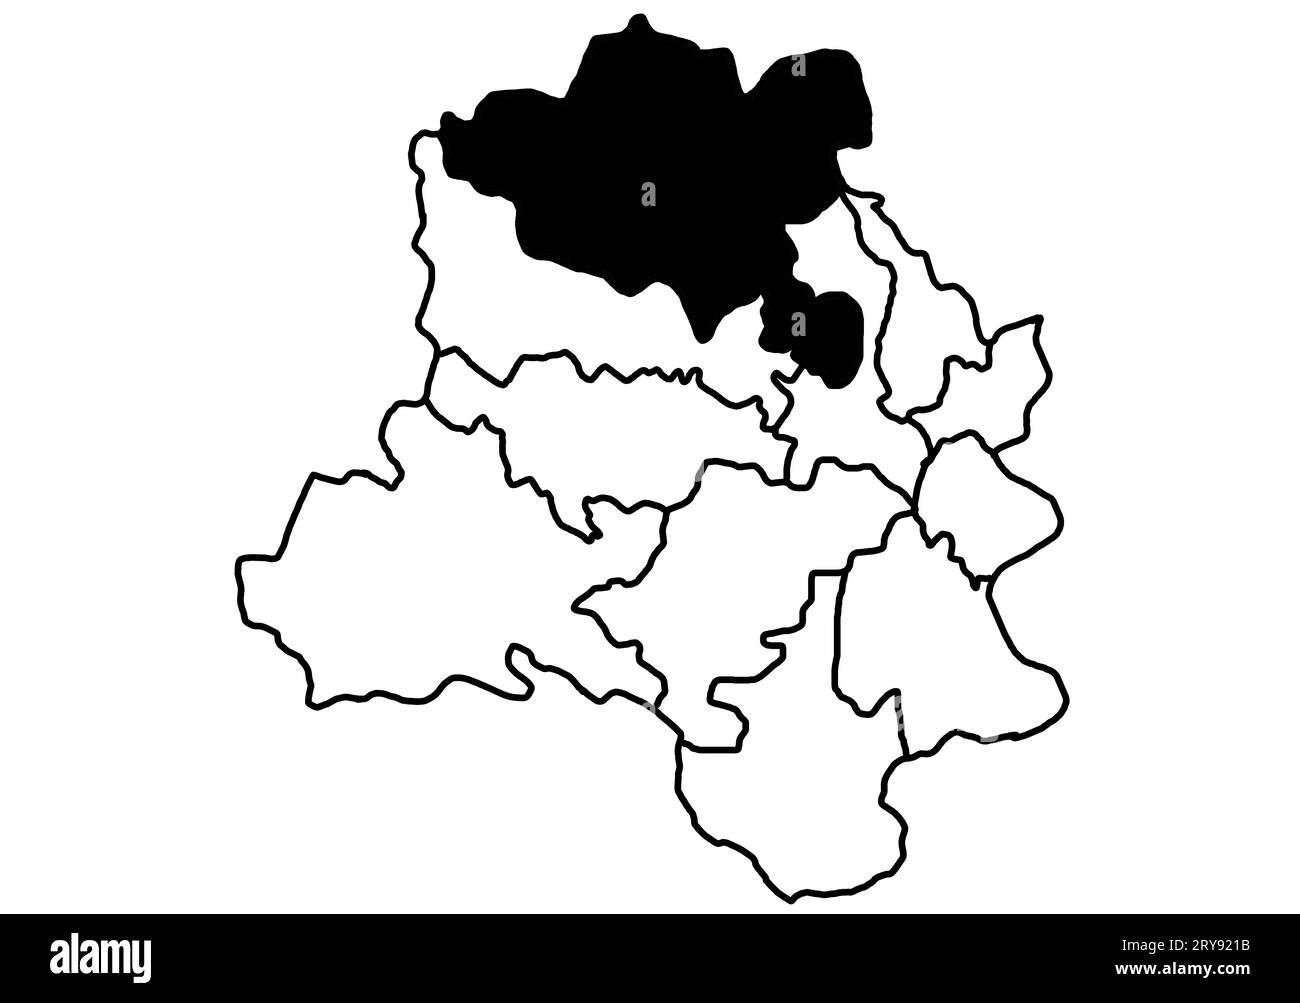 North Delhi, India Map Black Silhouette and Outline Isolated on White. Stock Photo